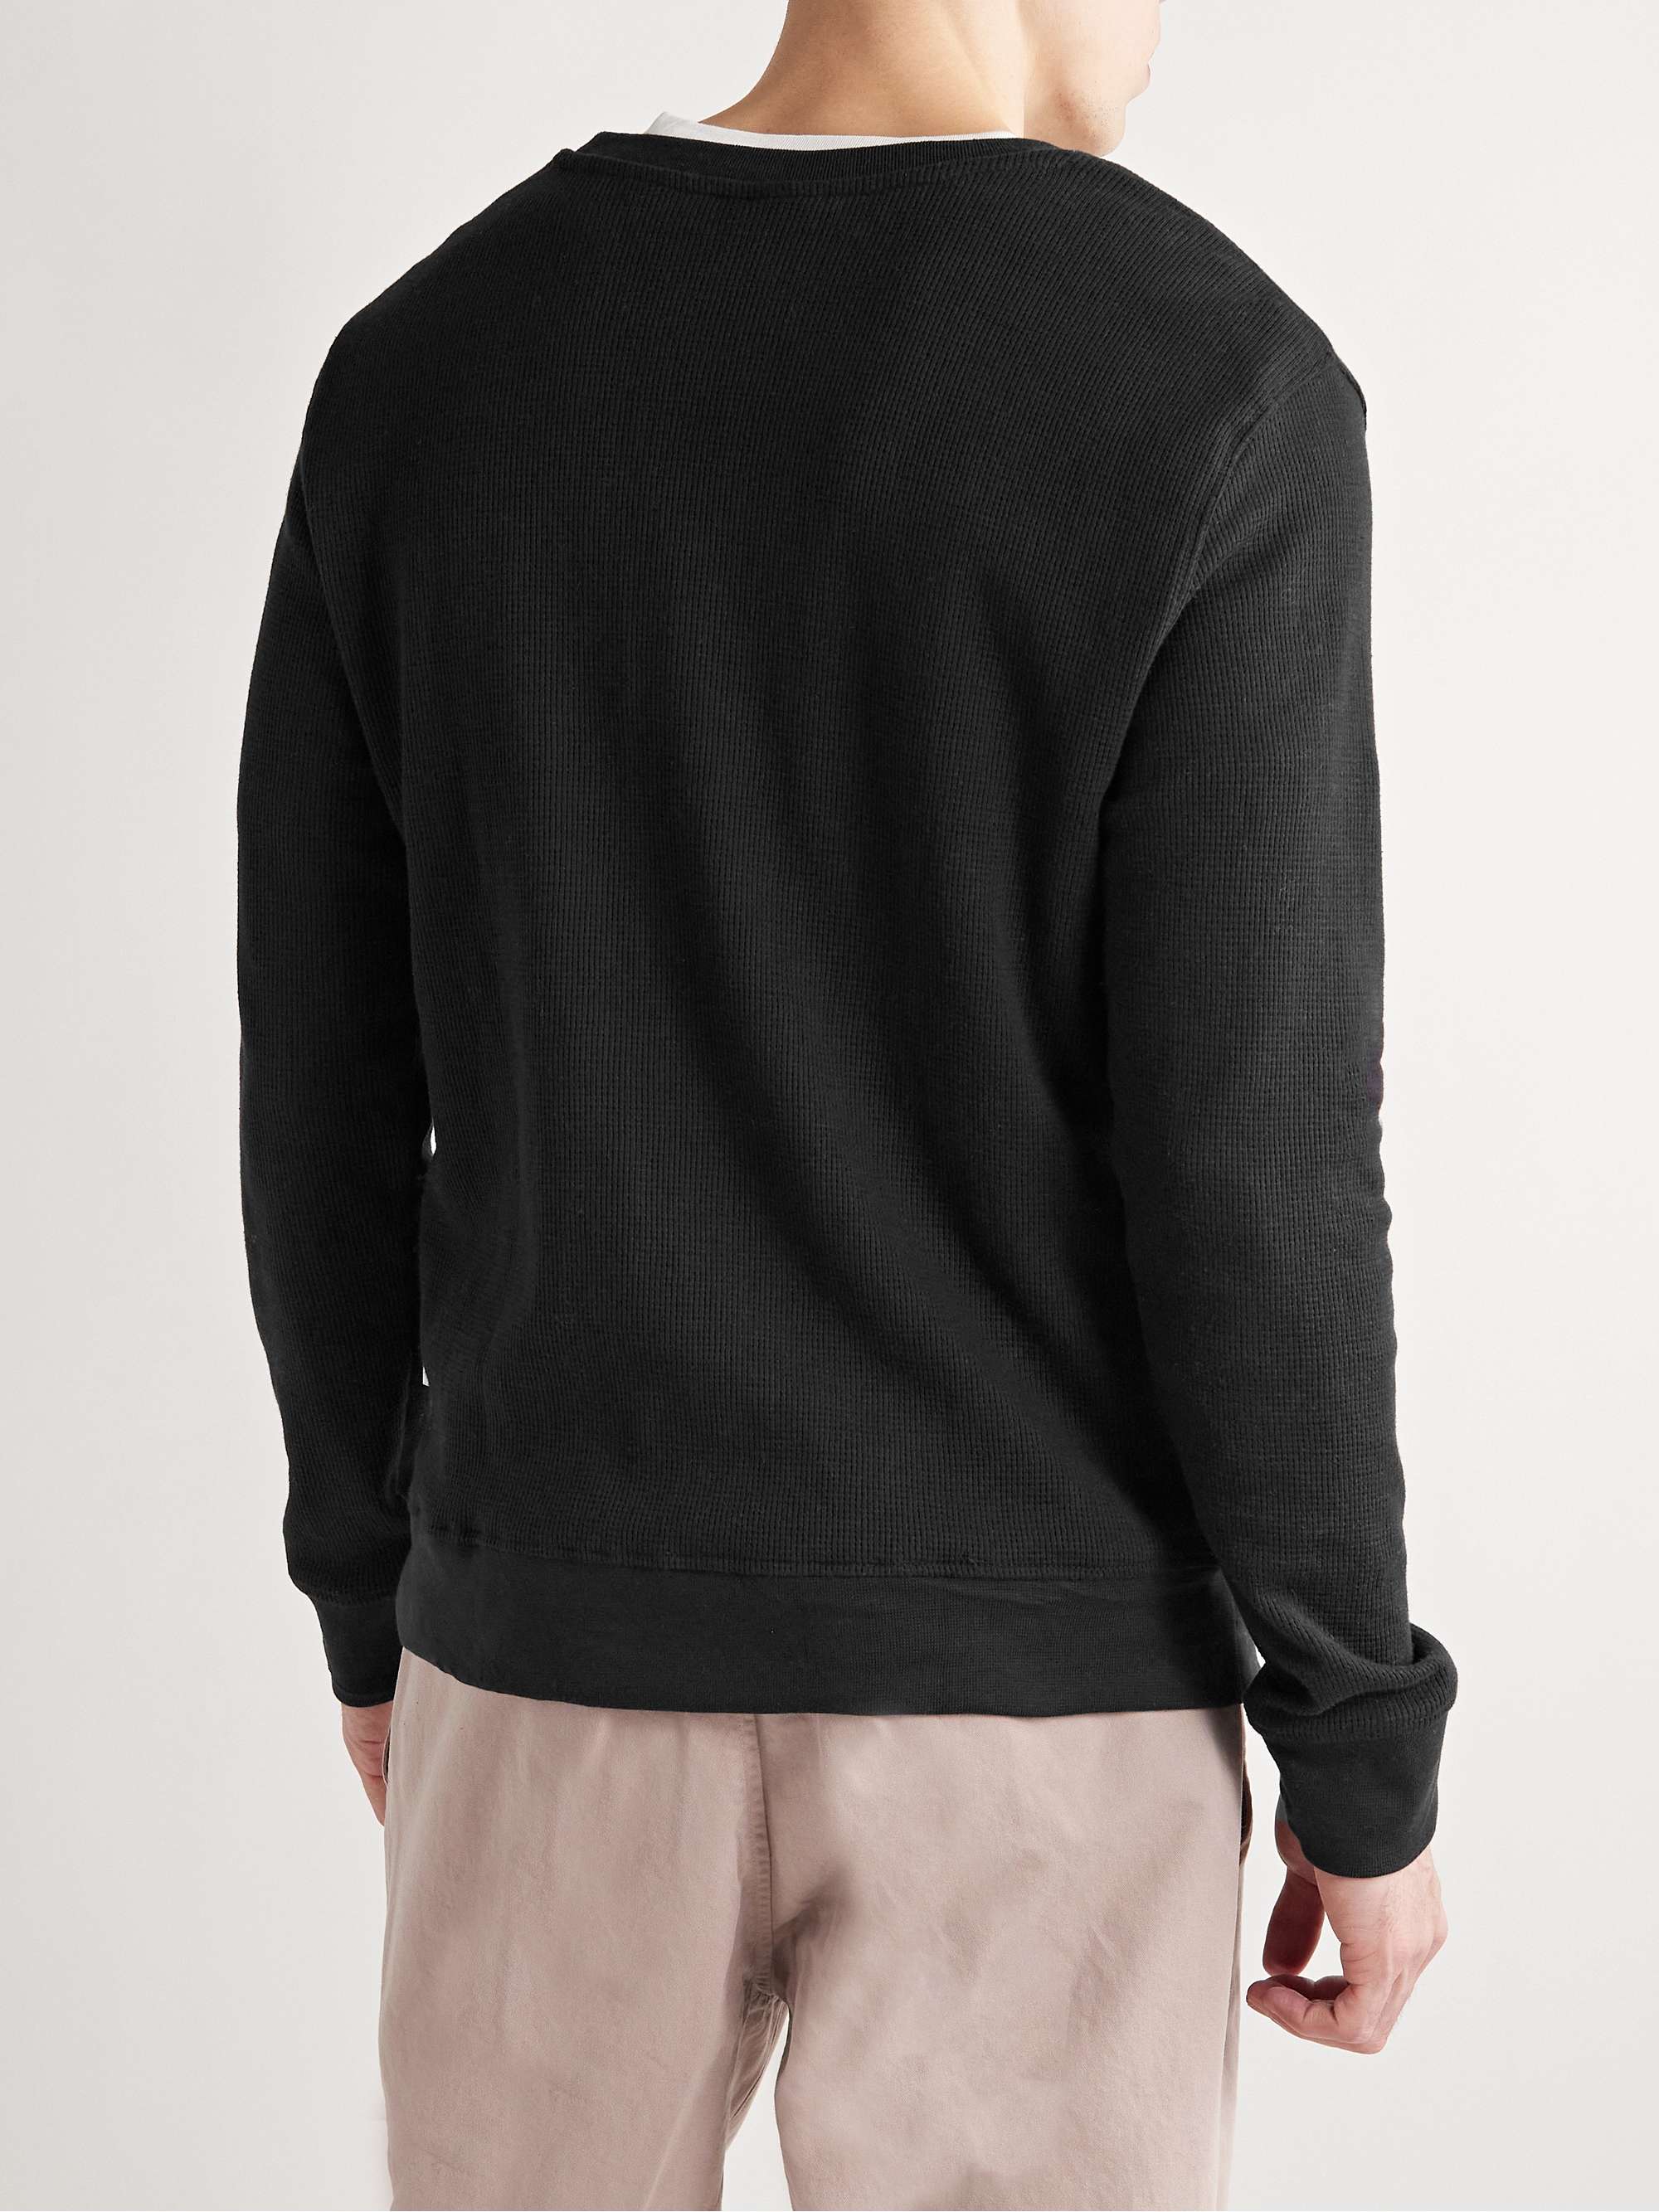 ONIA Slim-Fit Waffle-Knit Cotton-Blend Sweater for Men | MR PORTER